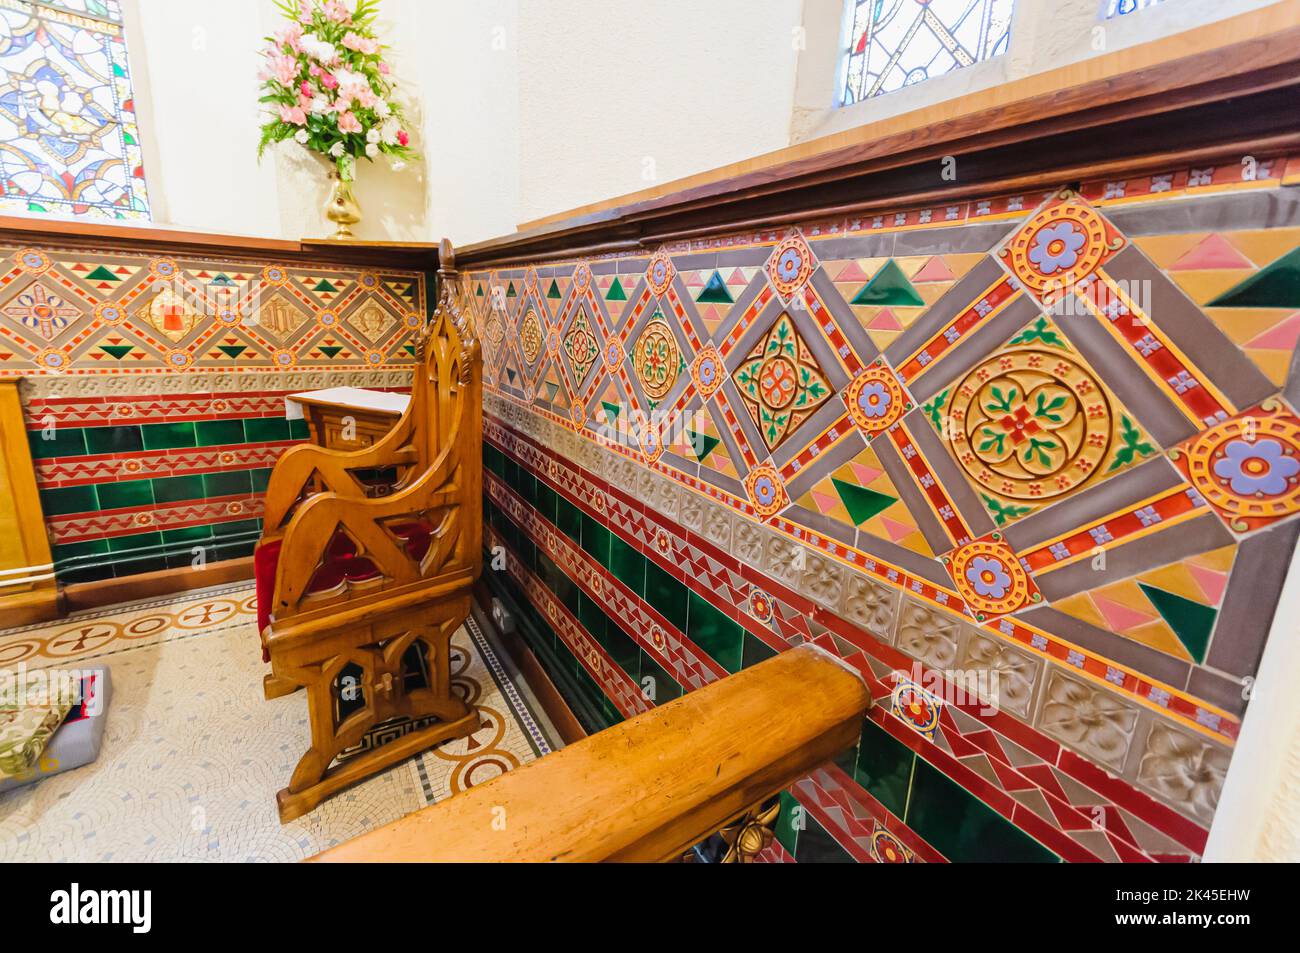 Ornate, old wall tiles inside a church. Stock Photo